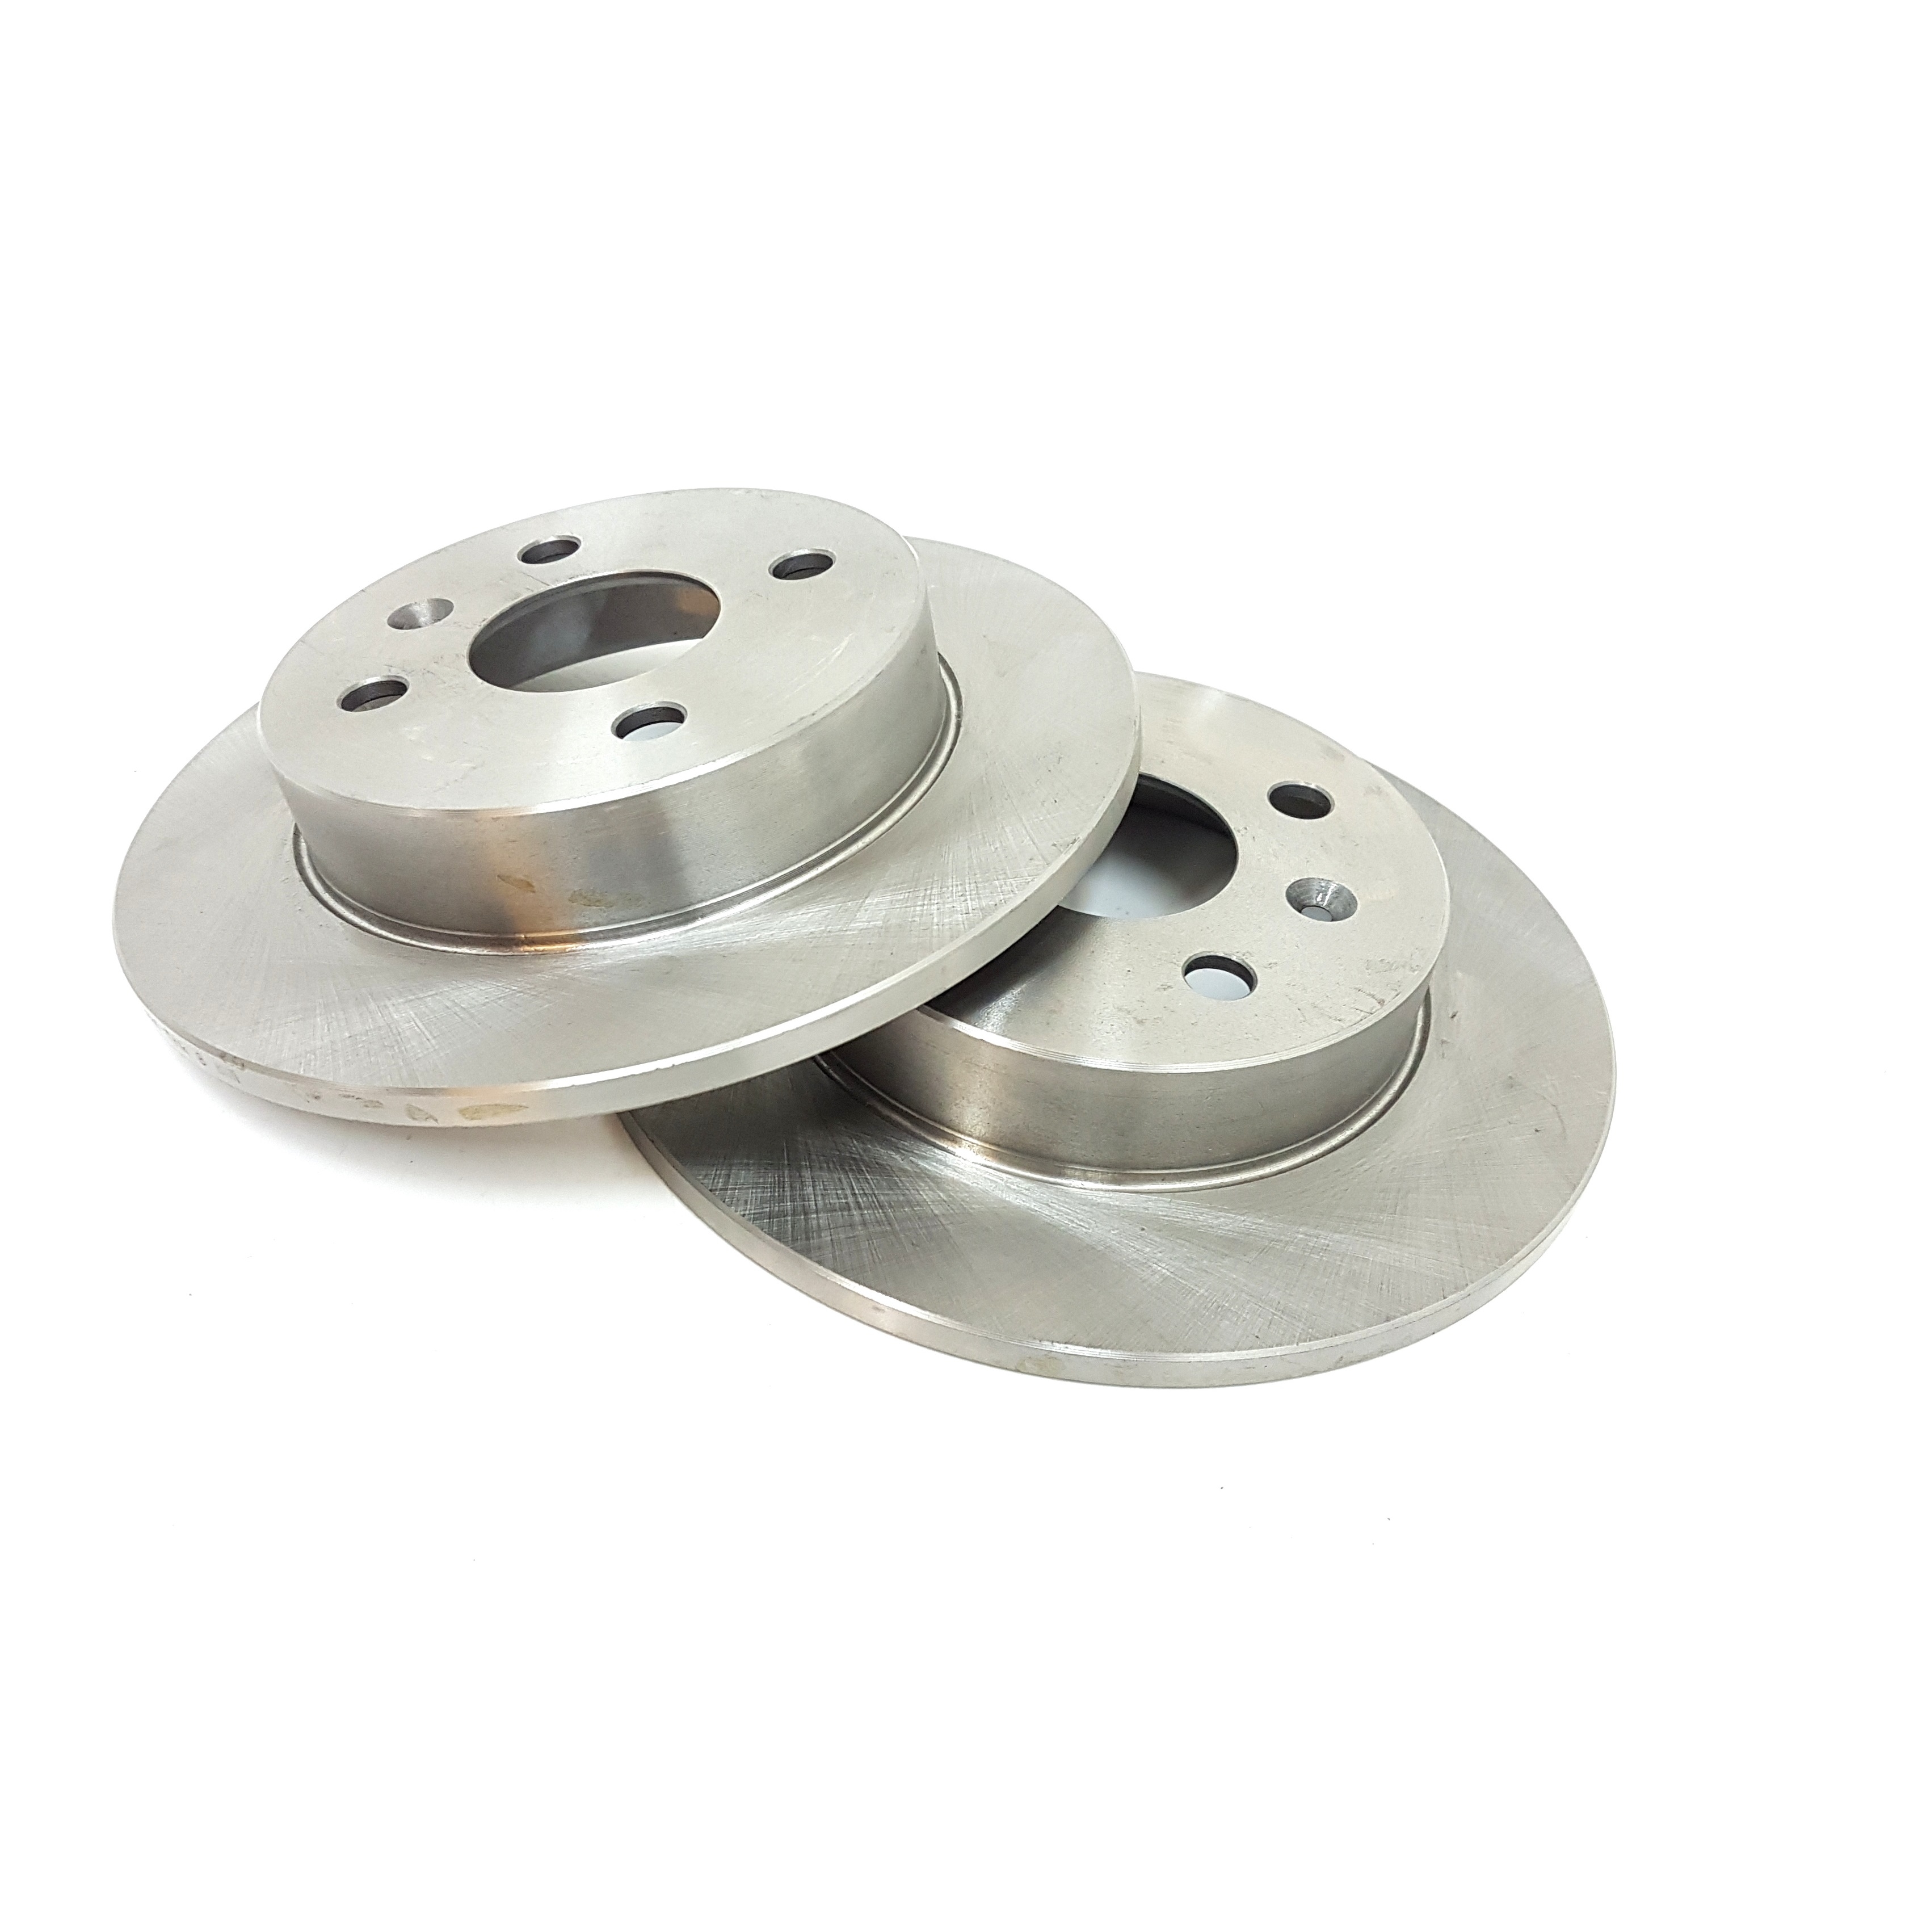 OEM SPEC REAR DISCS AND PADS 264mm FOR VAUXHALL ZAFIRA 1.8 1999-04